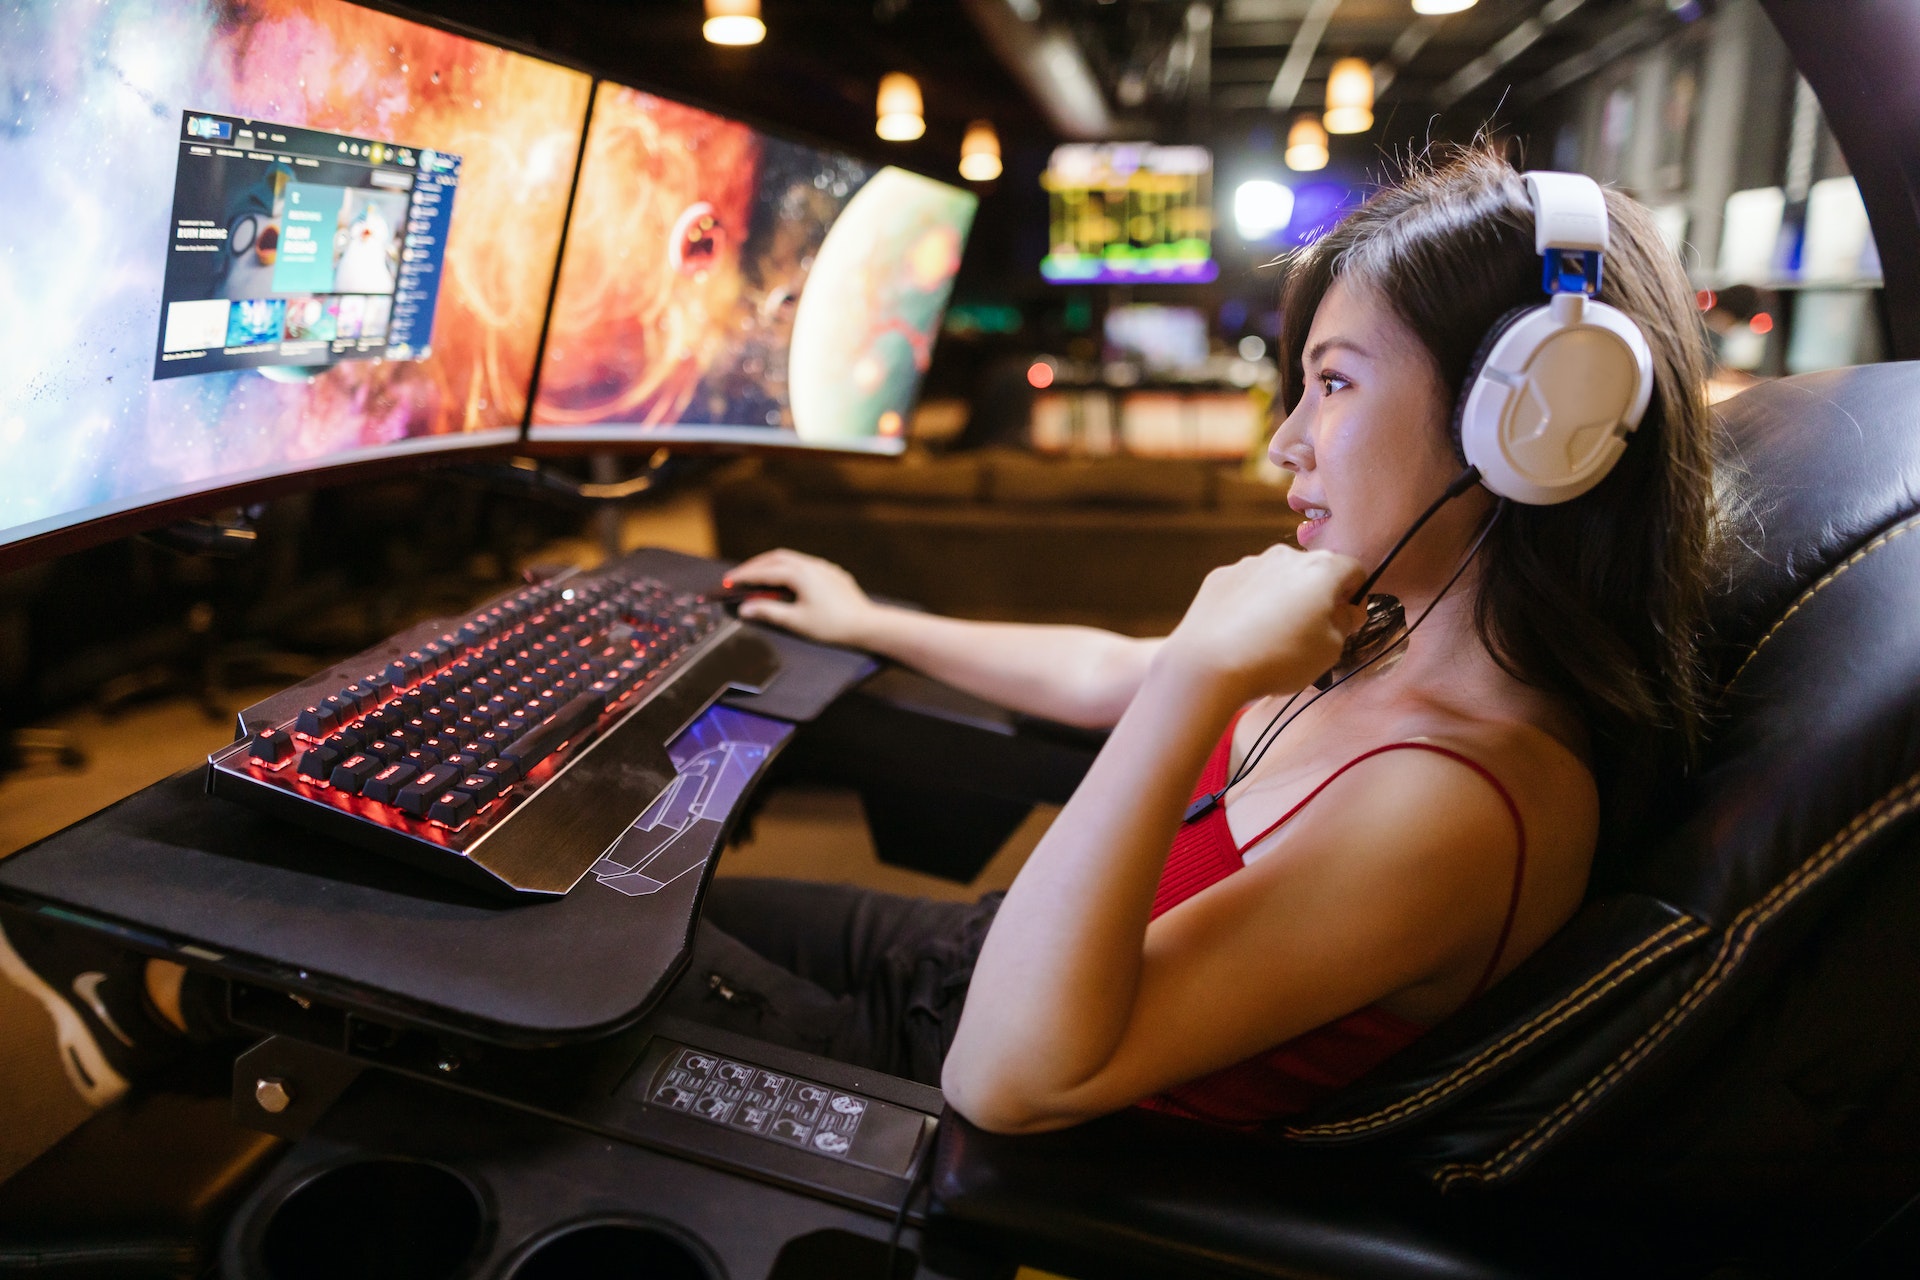 It's about representation': Lancaster-based Twitch streamer uses platform  for more than gaming, Entertainment